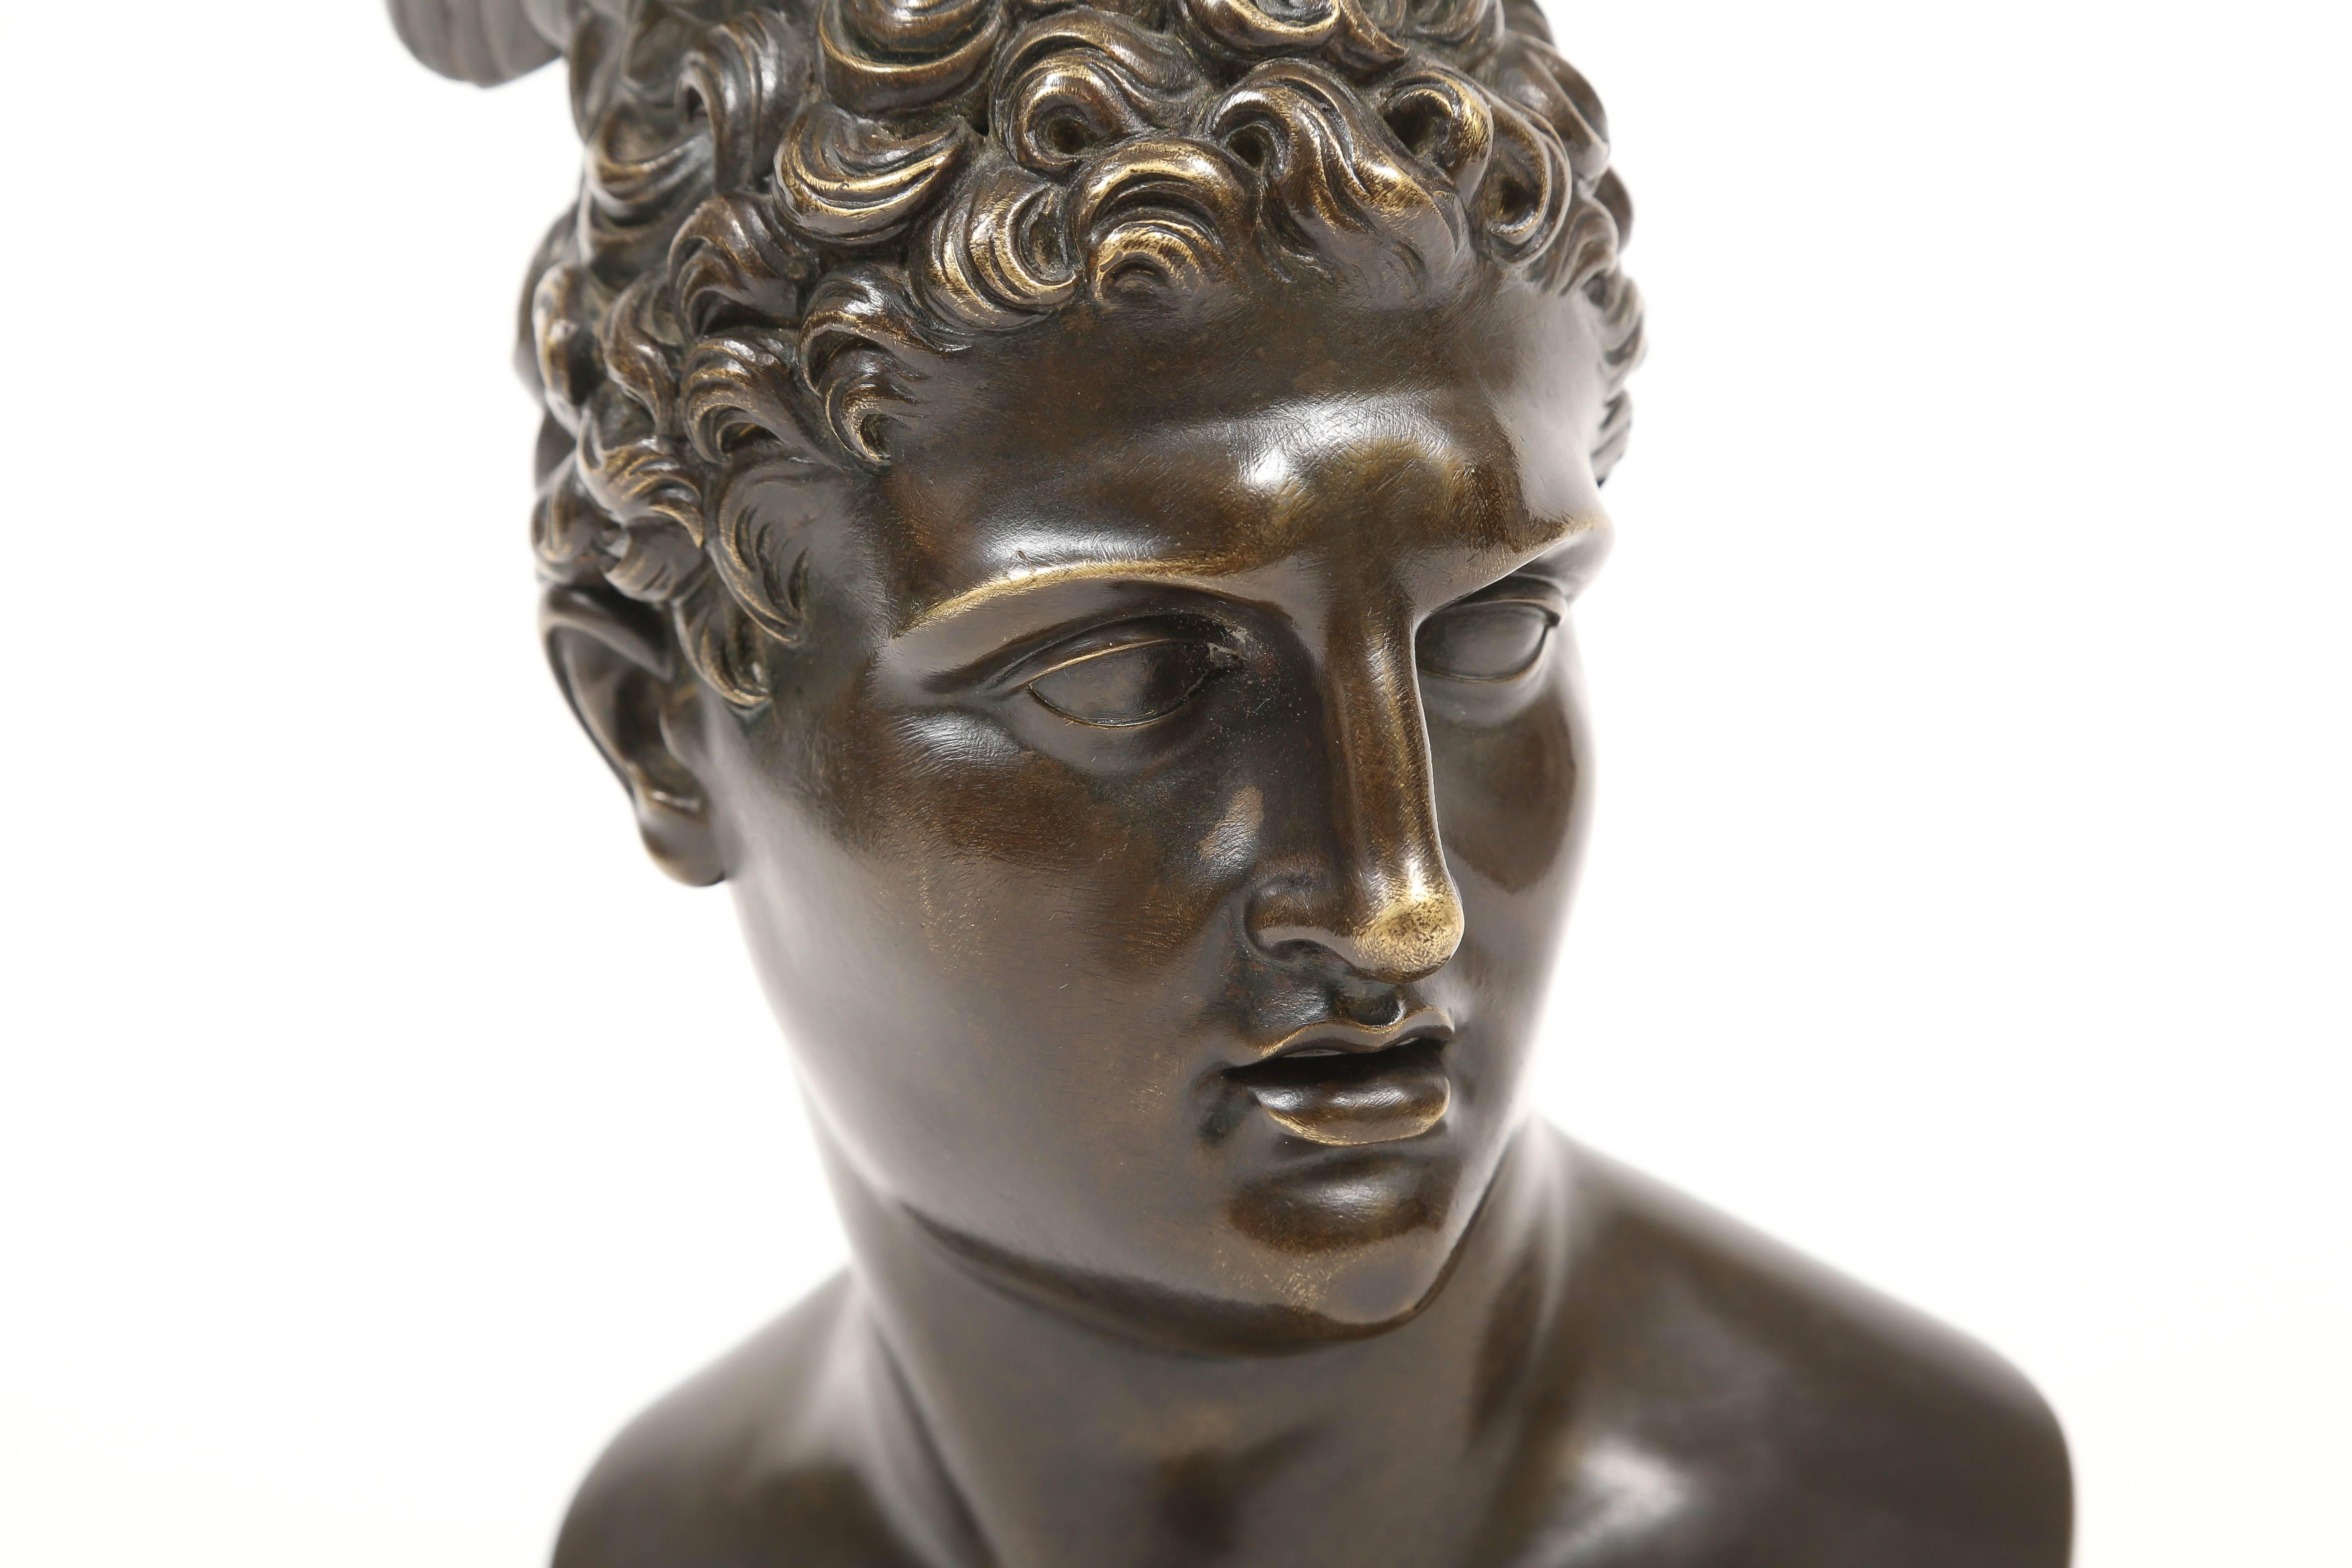 A fine bronze bust of Mercury on a turned bronze socle. A paper label taped on the back states in French "Mercury called Antinous, son of Jupiter messenger of the gods and himself the god of eloquence, commerce and thieves."

